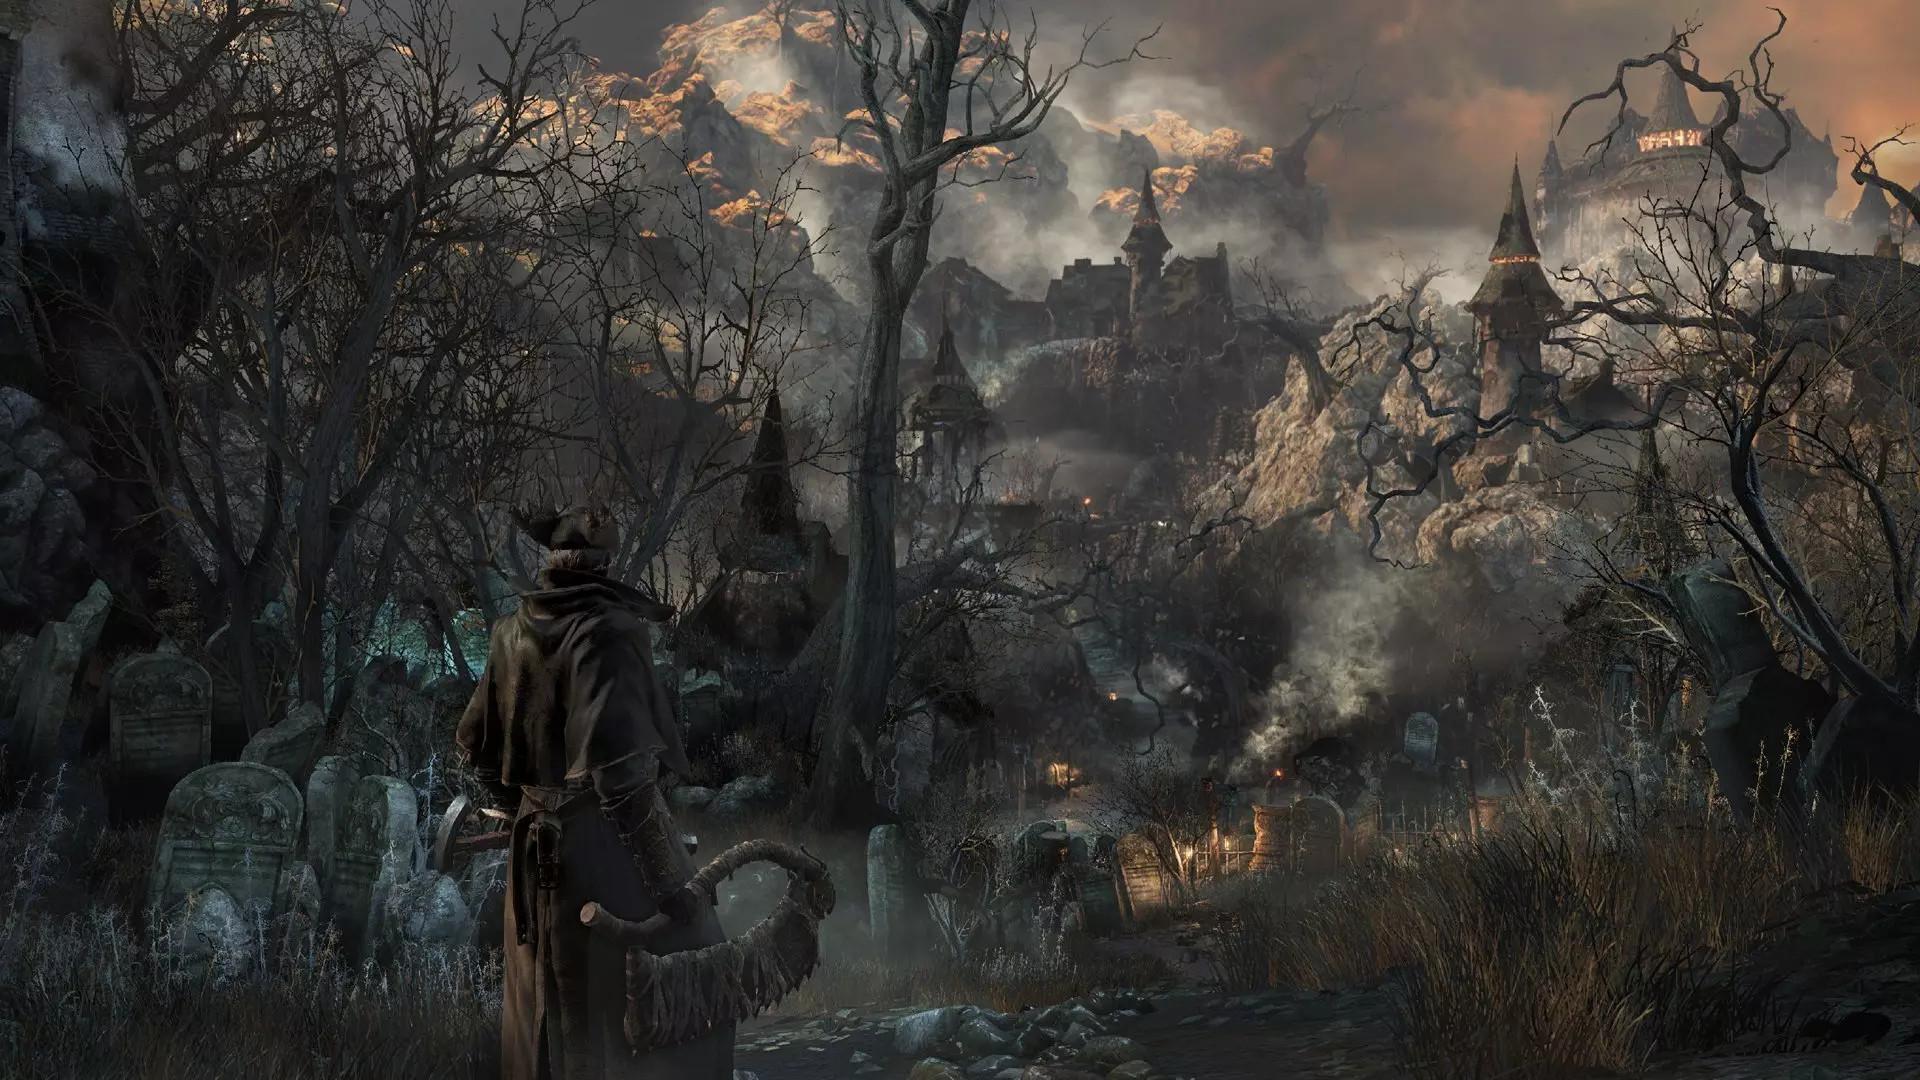 Sony Deletes Bloodborne Tweet That Had Fans Excited - KeenGamer